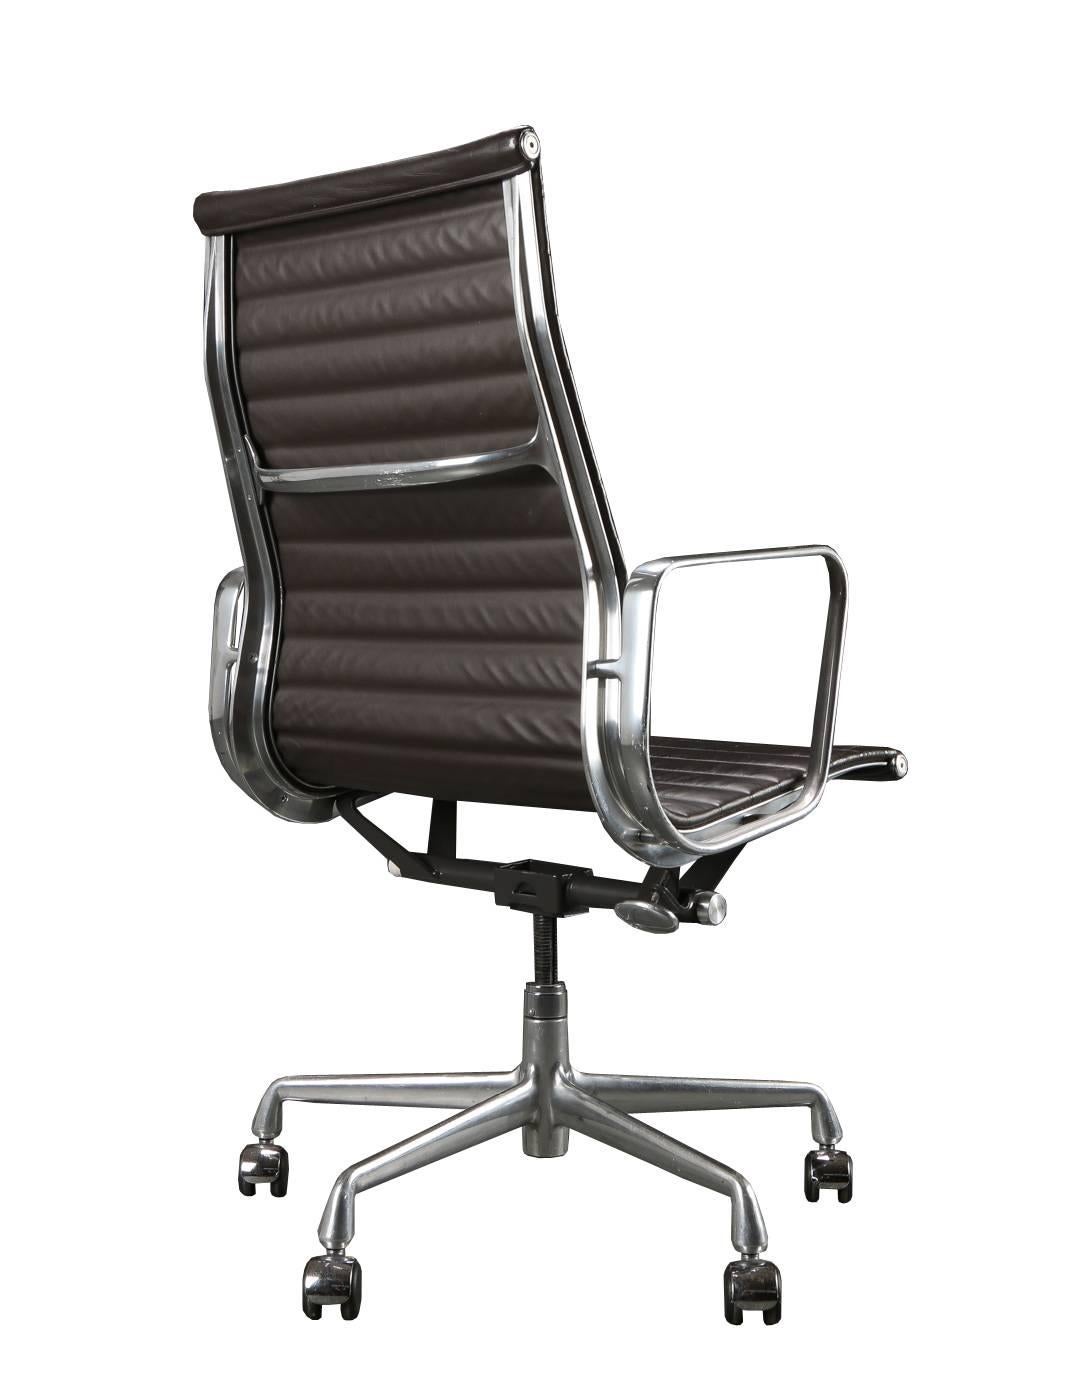 Mid-Century Modern Aluminium Series Office Chair by Charles and Ray Eames